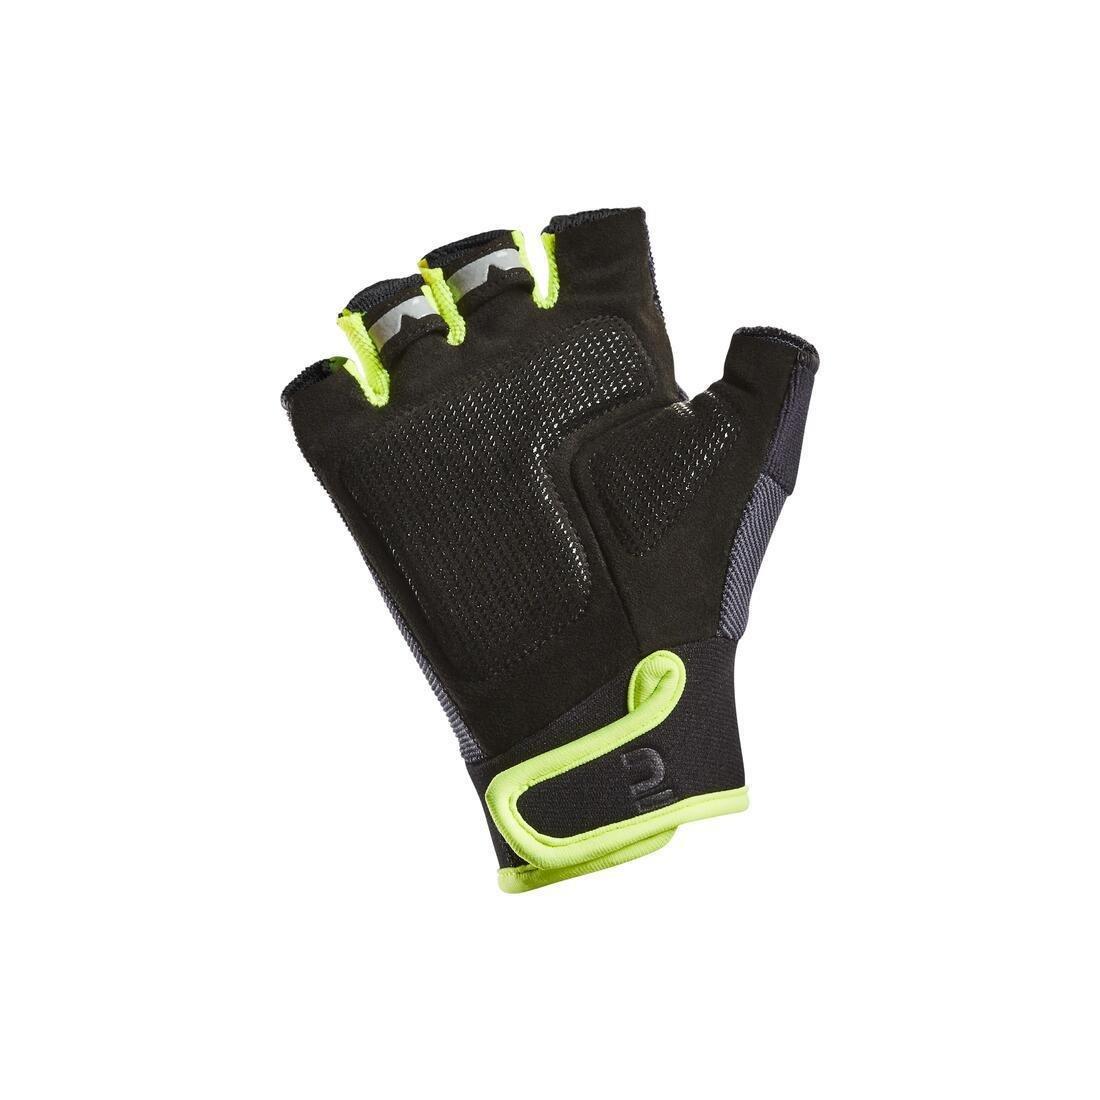 BTWIN - Kids' Cycling Gloves 500, Fluo lime yellow